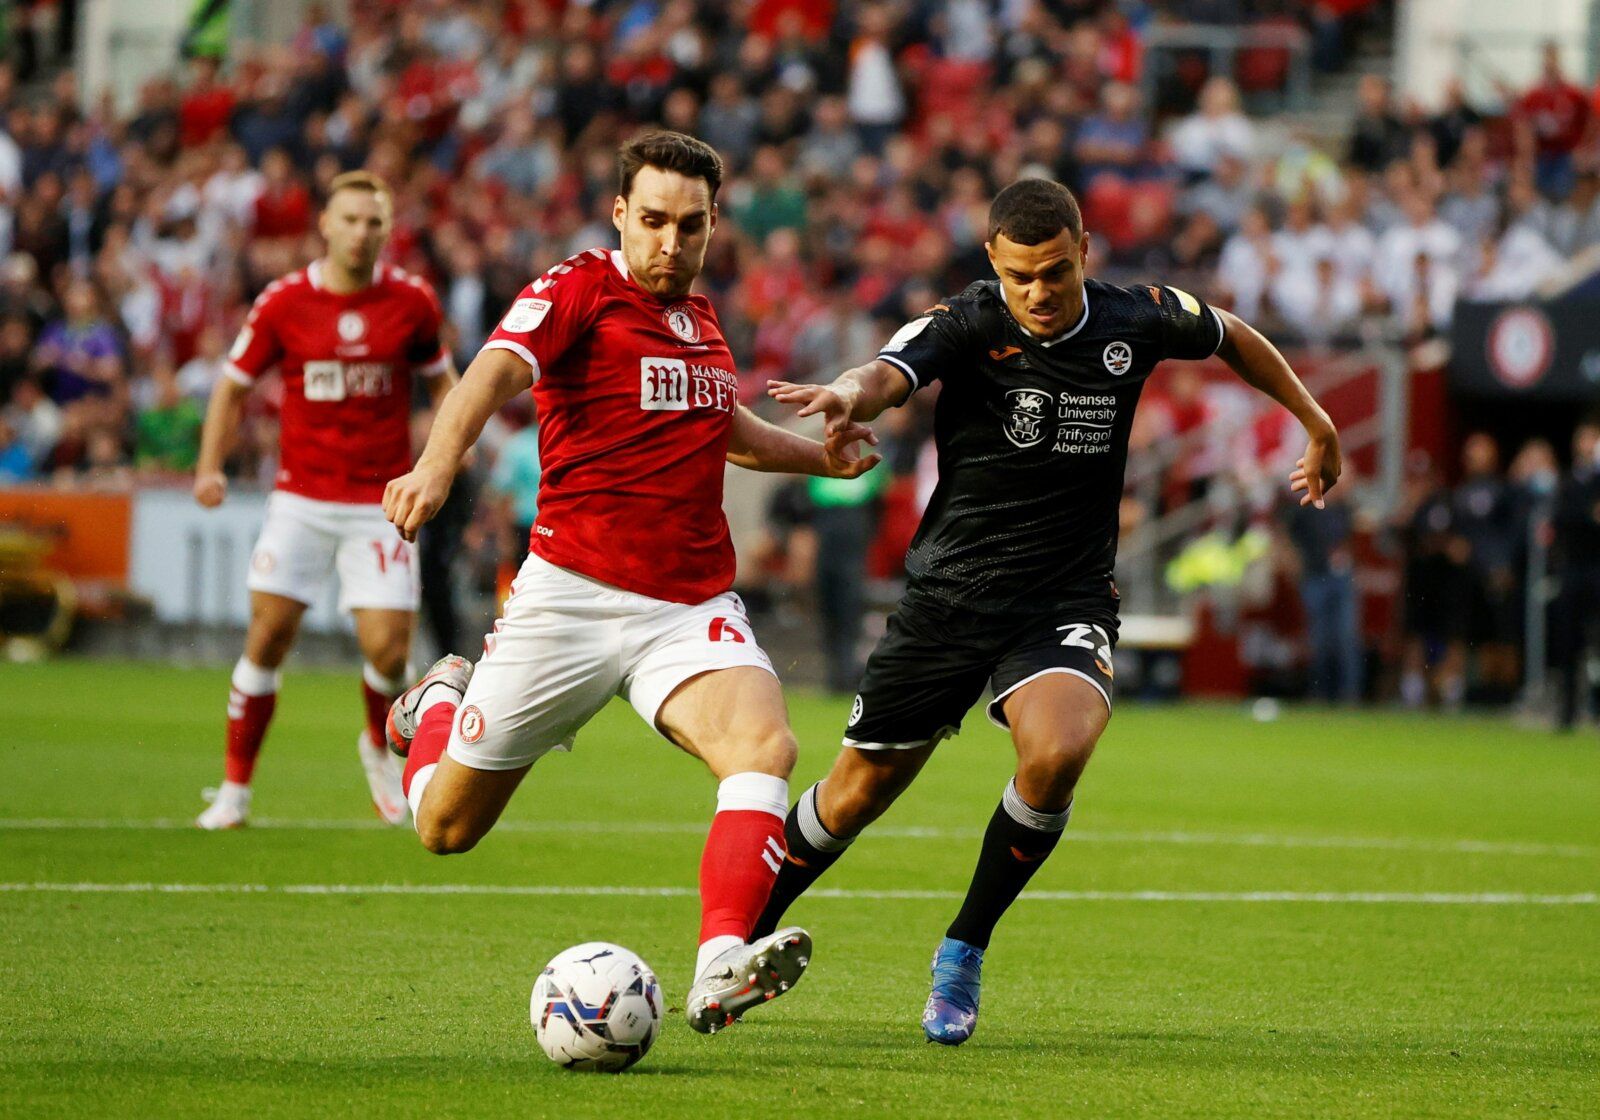 Soccer Football - Championship - Bristol City v Swansea City - Ashton Gate Stadium, Bristol, Britain - August 20, 2021  Bristol City's Matty James in action with Swansea City's Joel Latibeaudiere  Action Images/John Sibley  EDITORIAL USE ONLY. No use with unauthorized audio, video, data, fixture lists, club/league logos or 